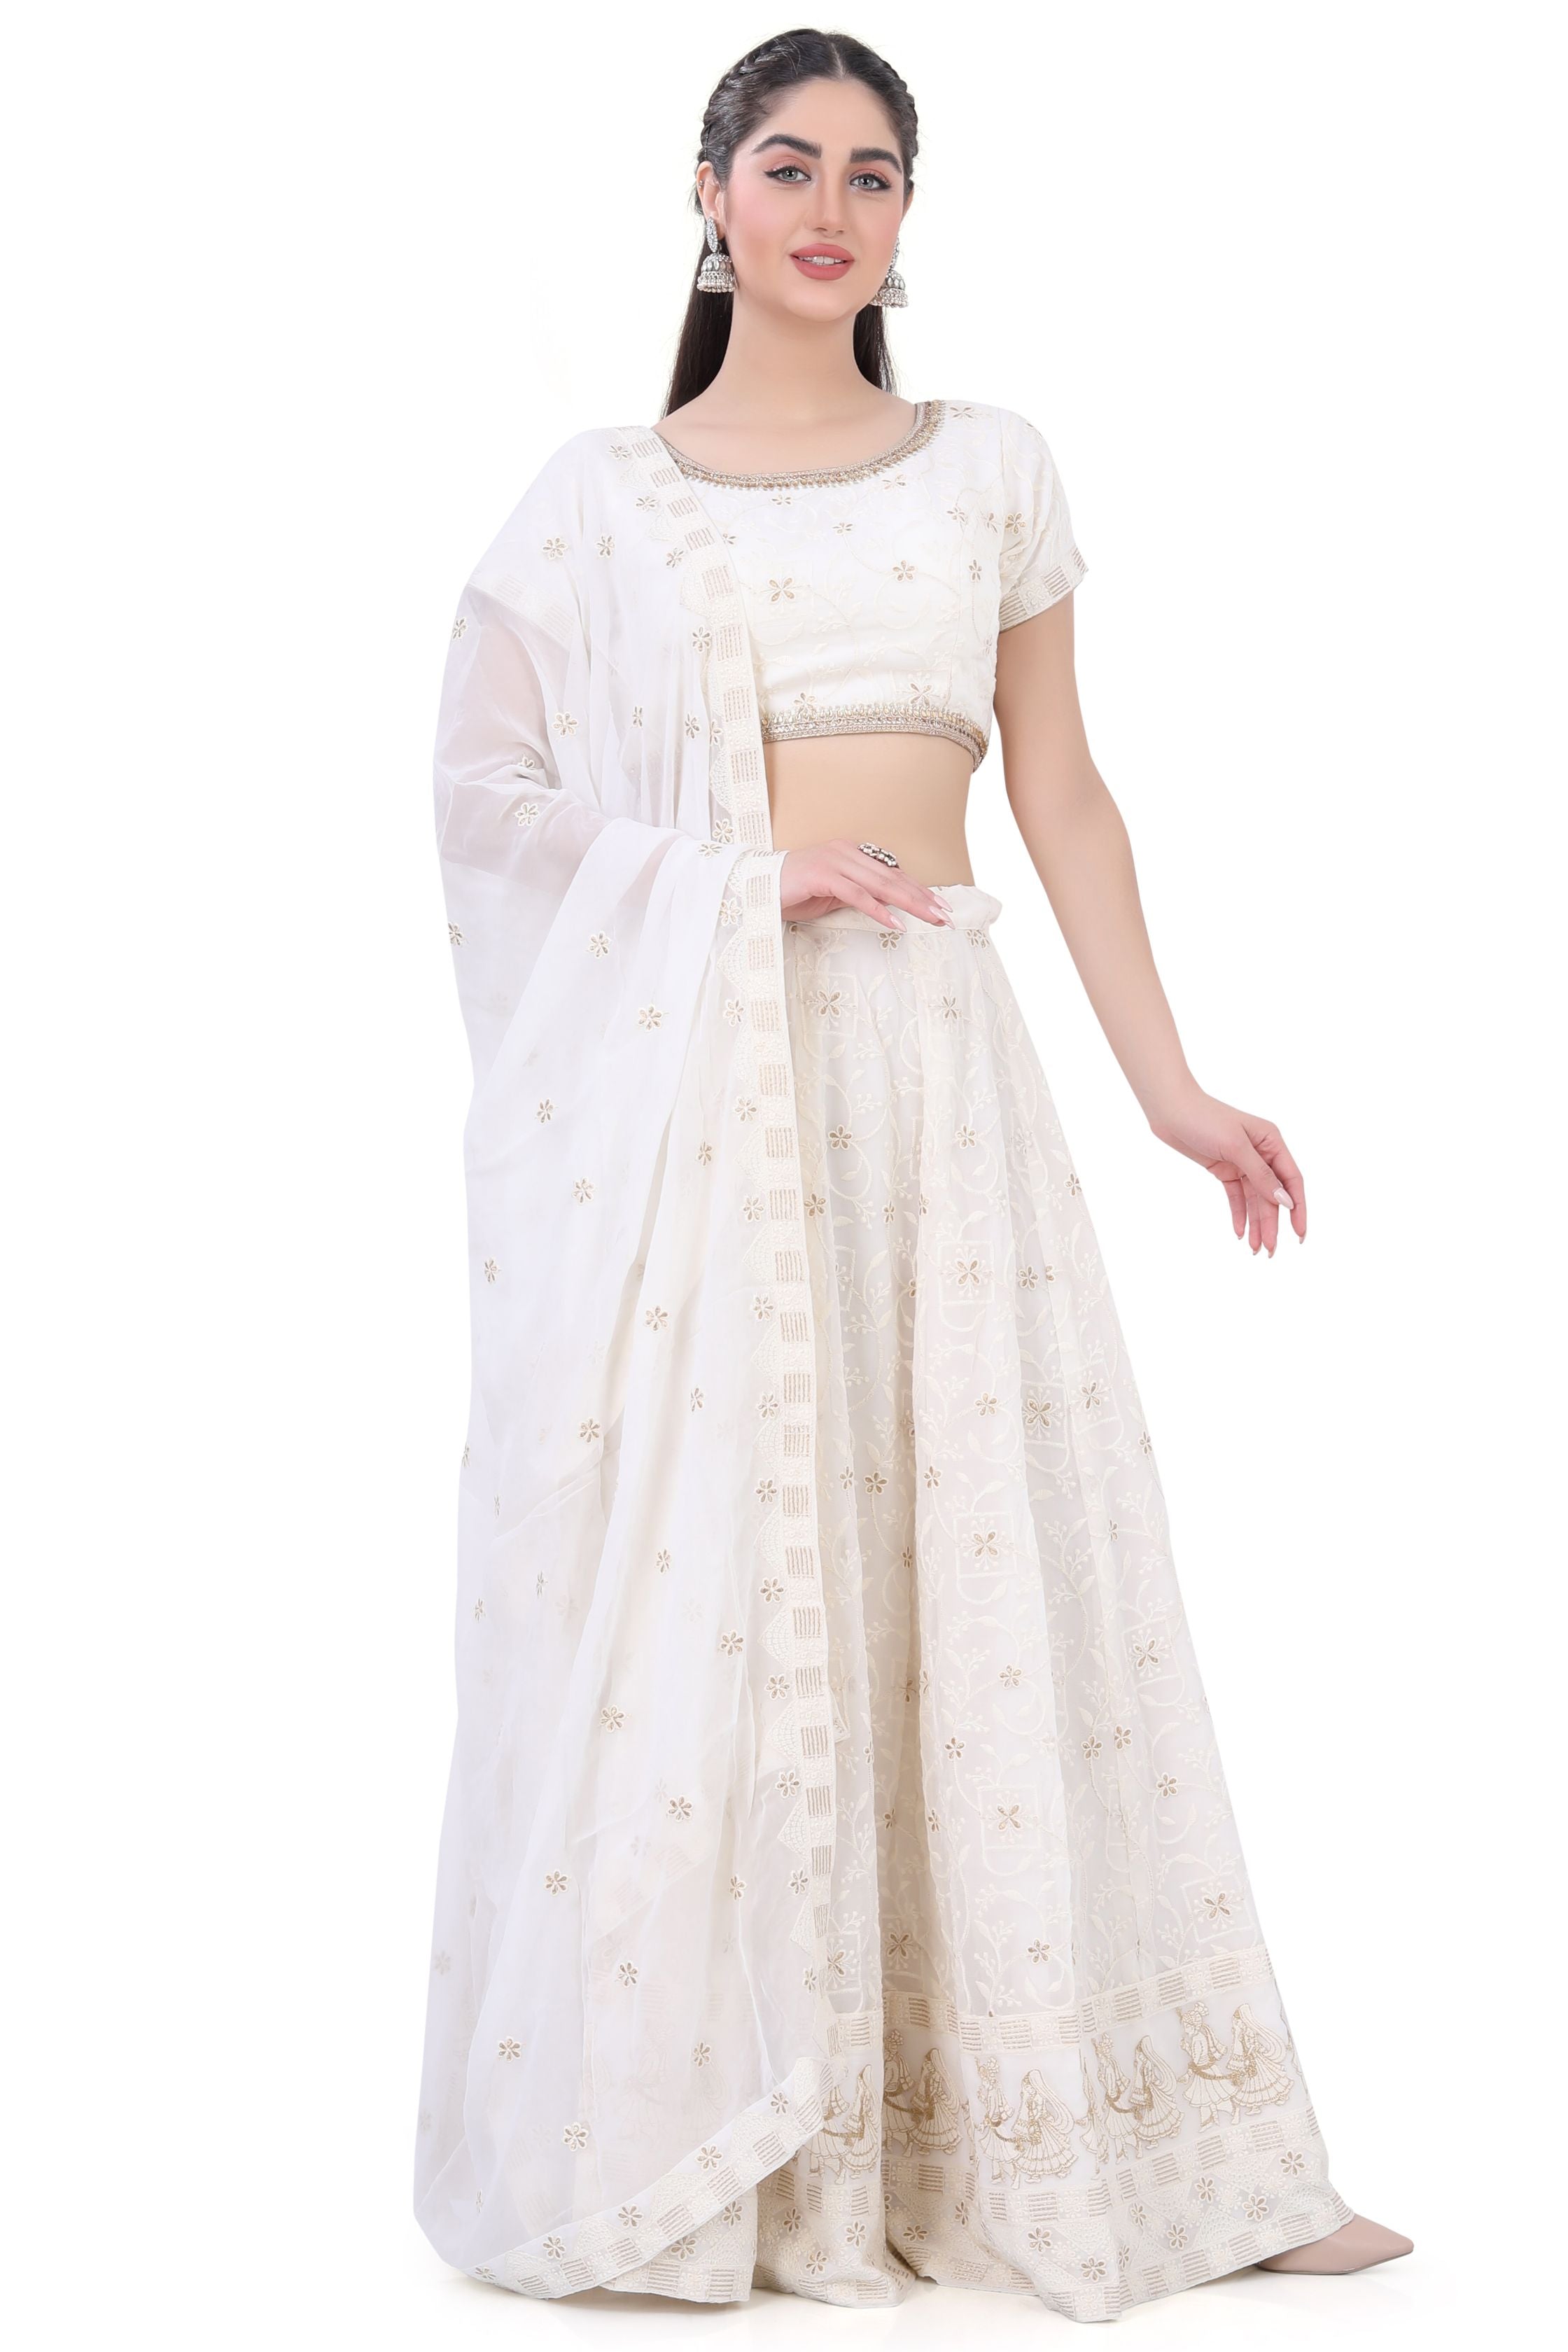 Off-White Georgette Lehenga Choli - Premium Partywear Lehenga from Dulhan Exclusives - Just $435! Shop now at Dulhan Exclusives